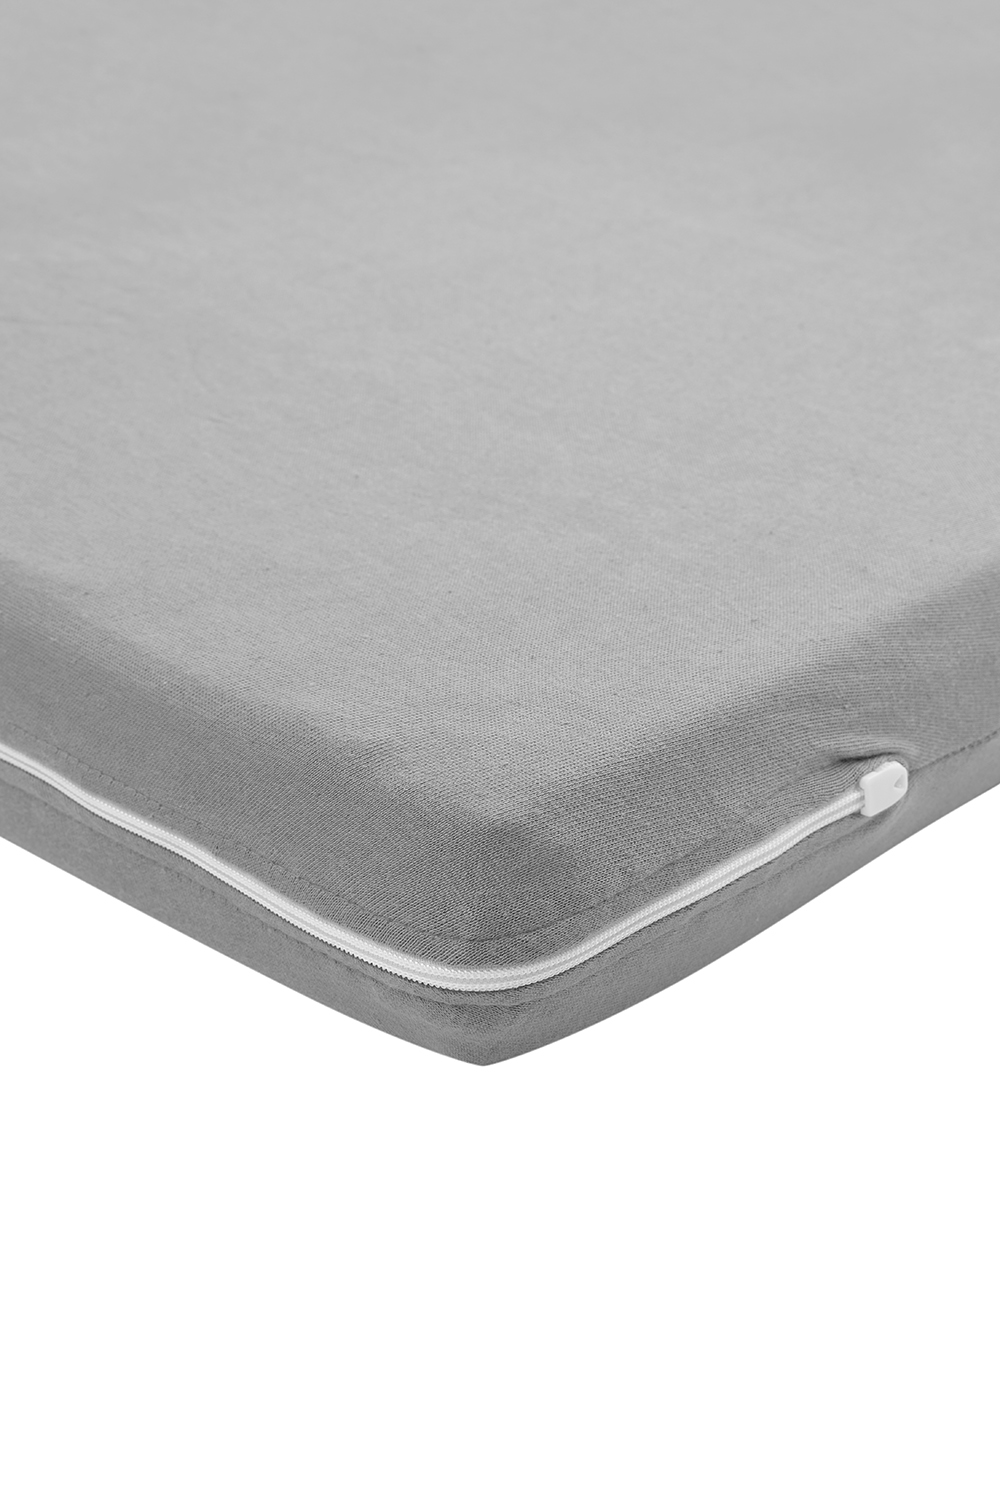 Jersey Campingbed Mattress Cover - Grey - 60X120cm